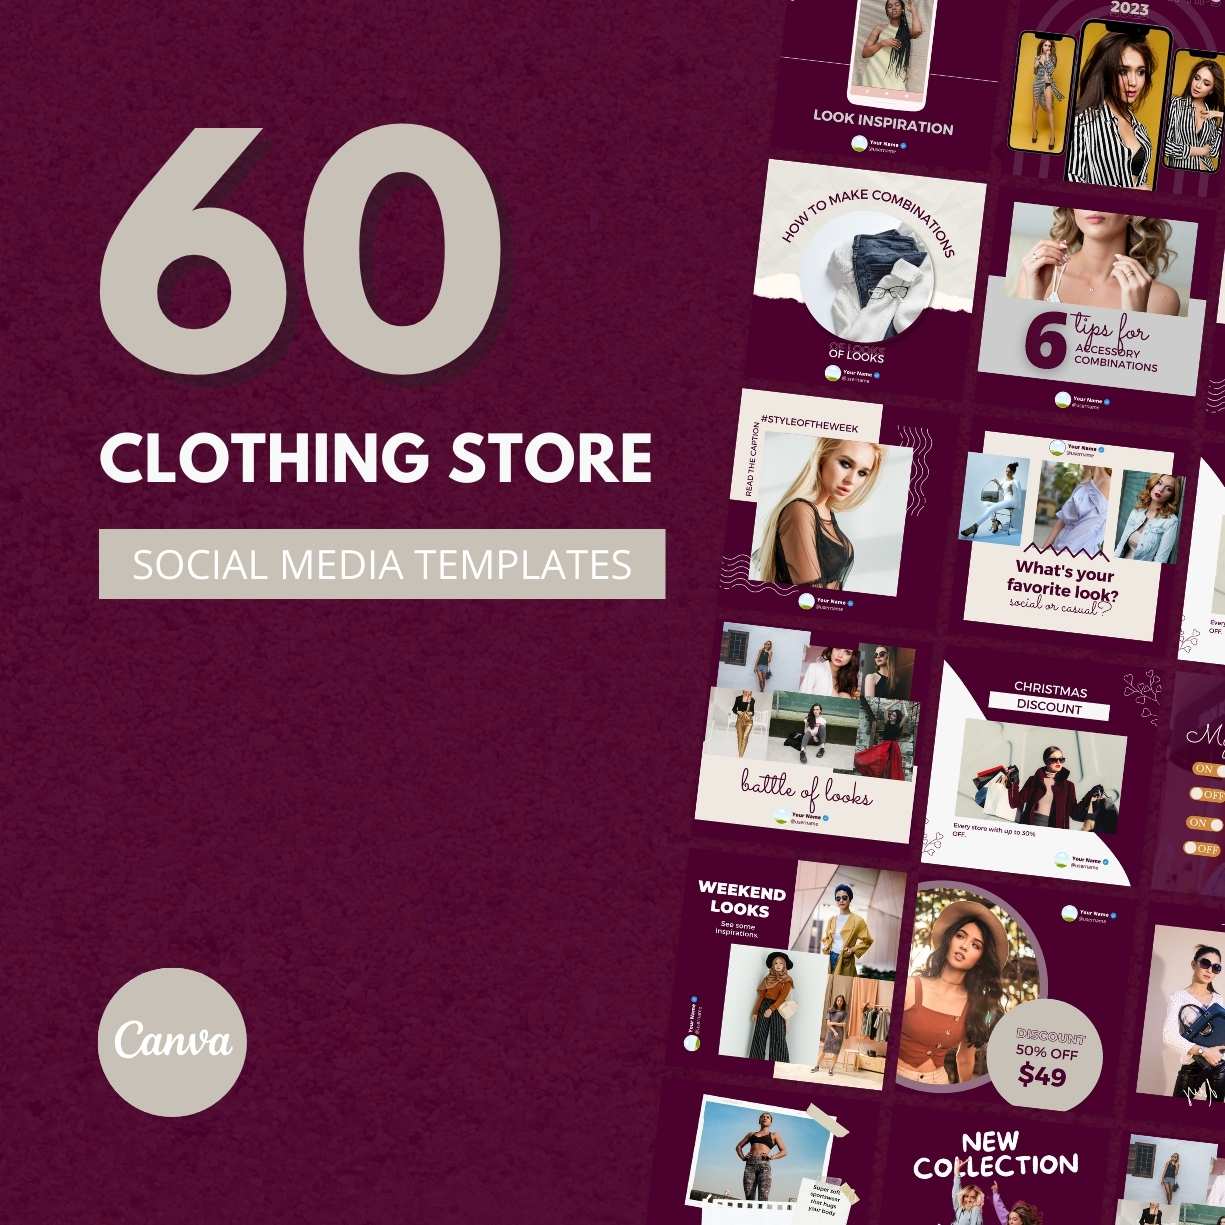 60 Premium Clothing Canva Templates For Social Media cover image.